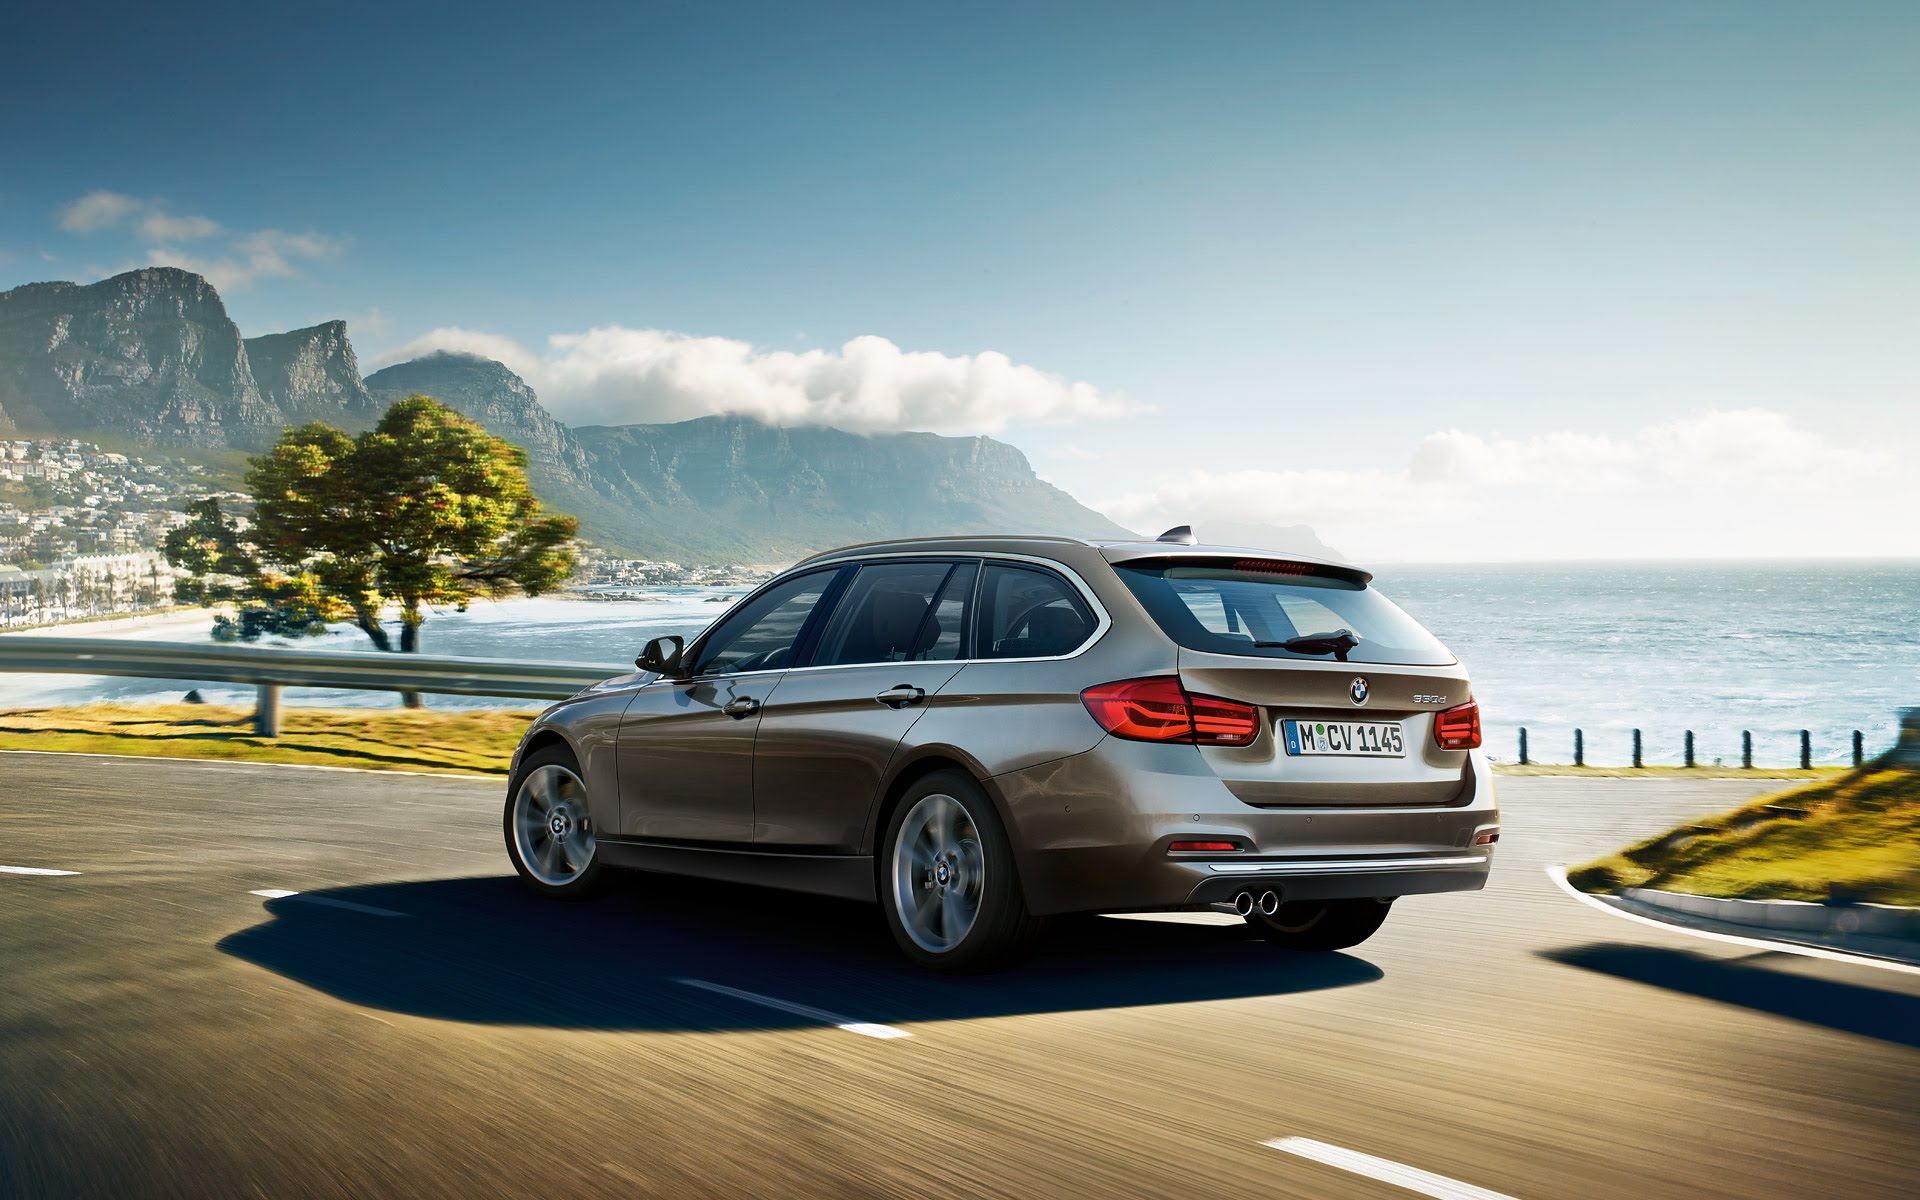 BMW 3 Series Touring Backgrounds, Compatible - PC, Mobile, Gadgets| 1920x1200 px